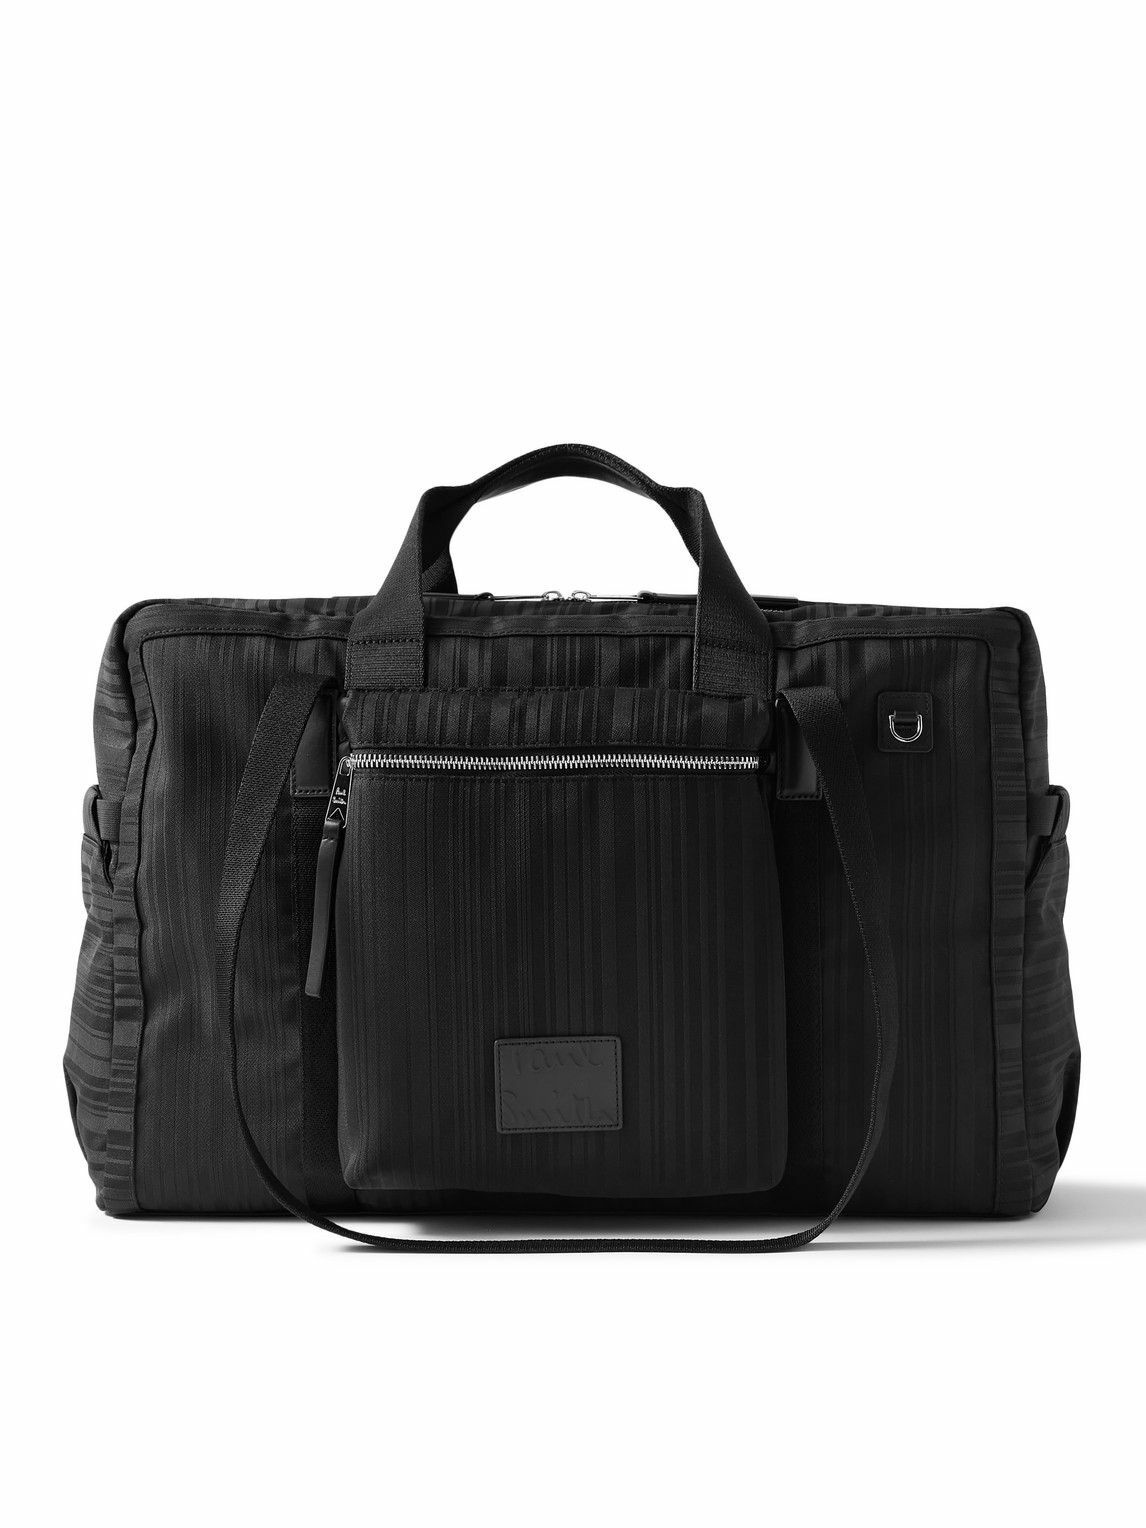 Paul Smith Bags - Bowler Hat Photograph Print Holdall